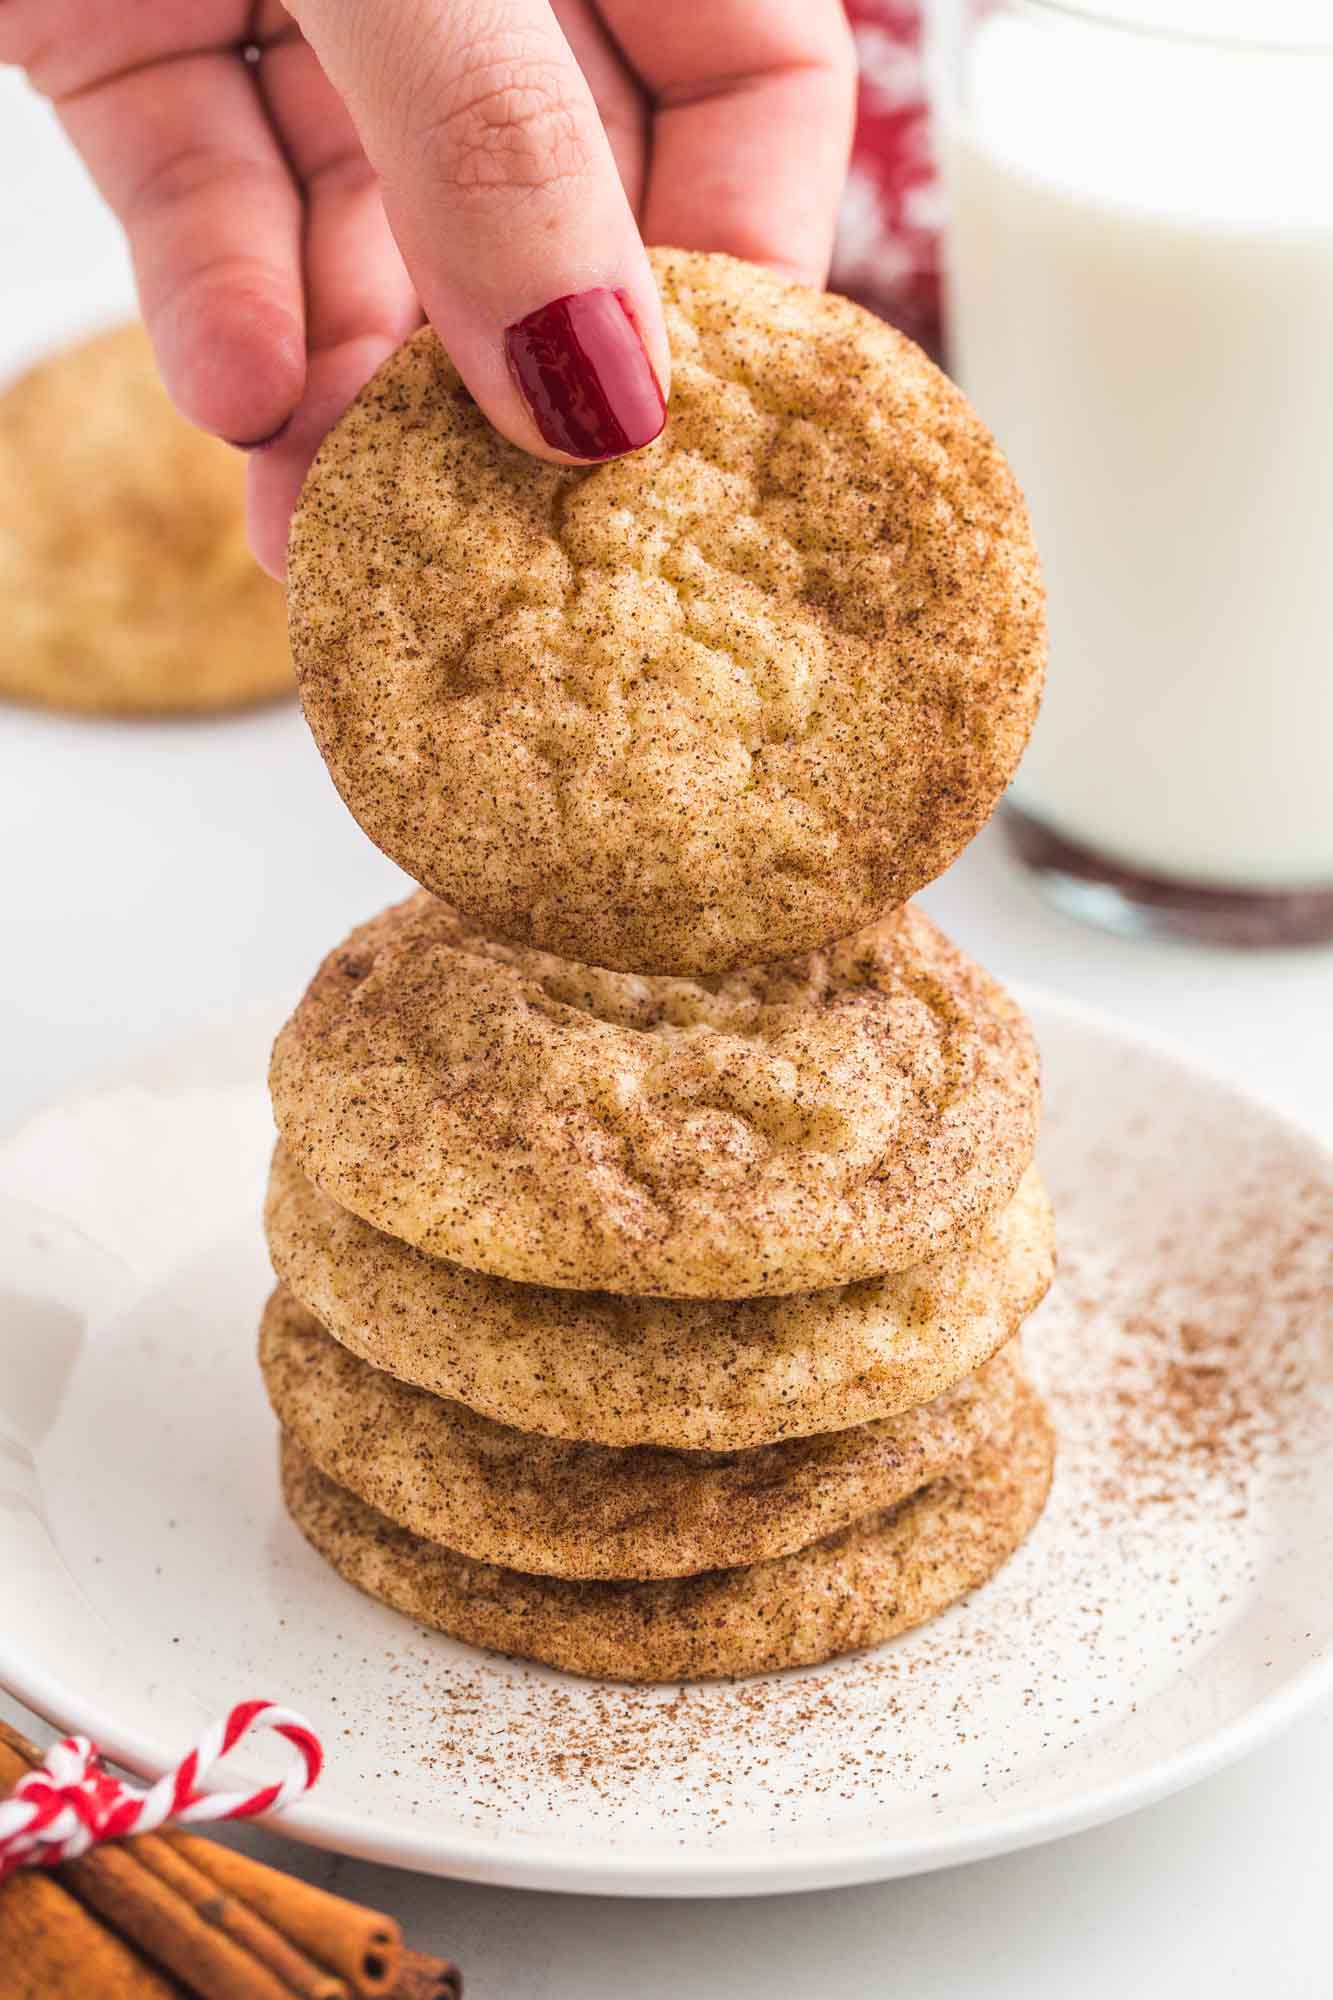 Taking a snickerdoodle from a stack of cookies on a white plate